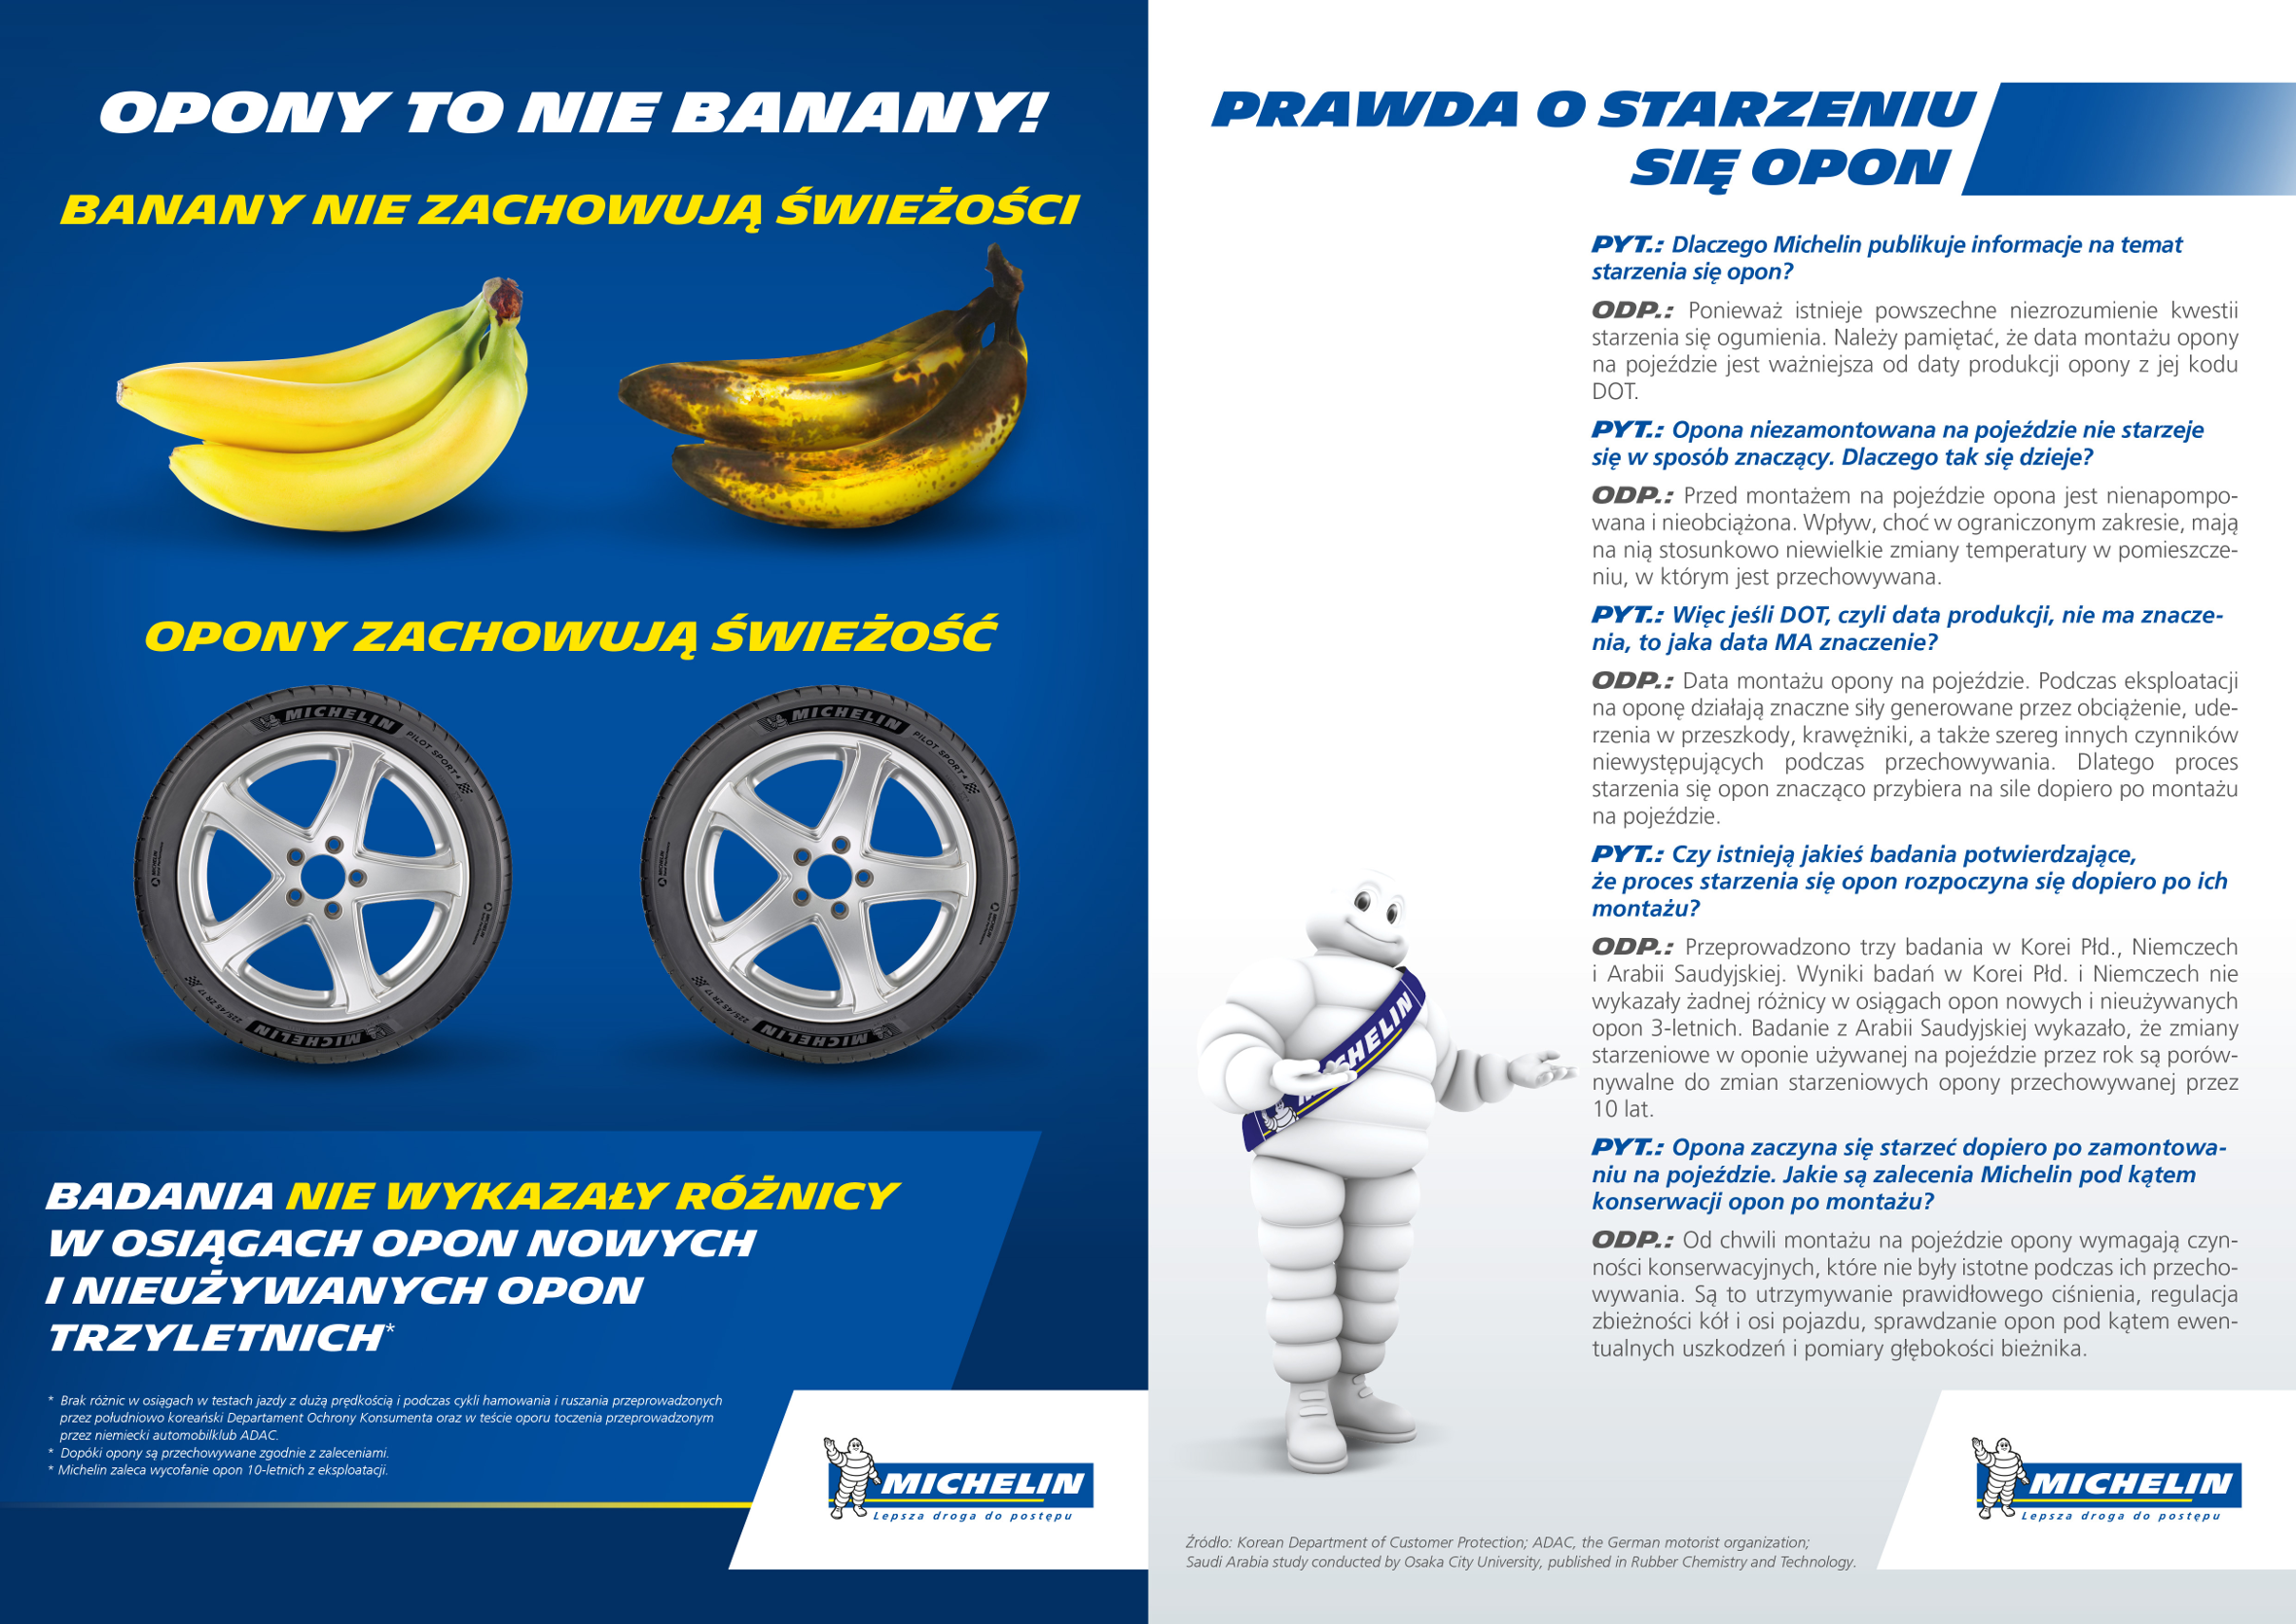 opony-to-nie-banany-michelin[1].png